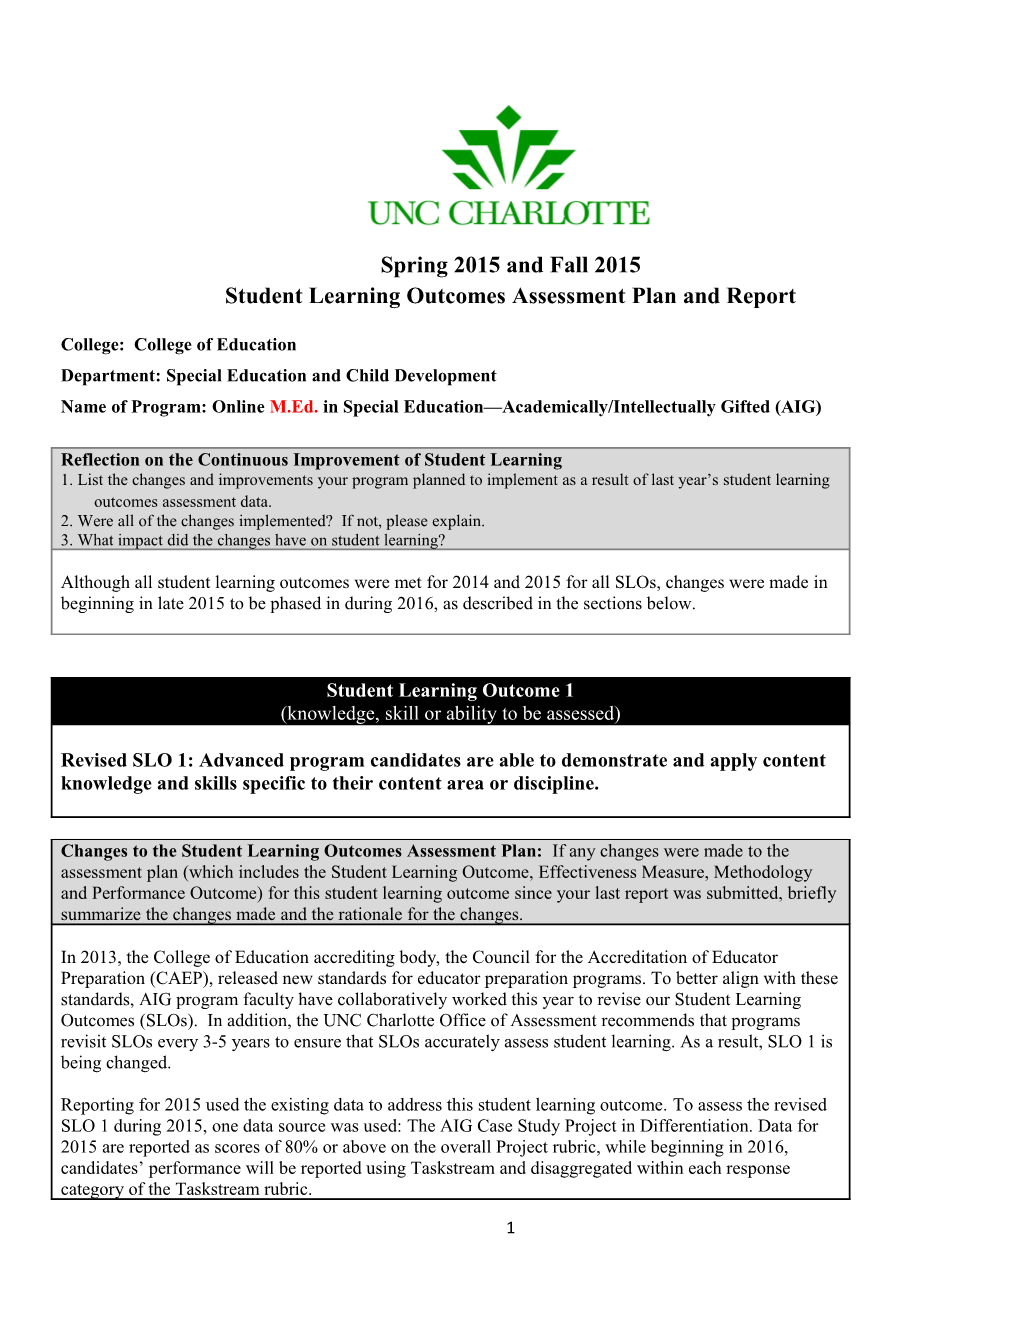 Student Learning Outcomes Assessment Plan and Report